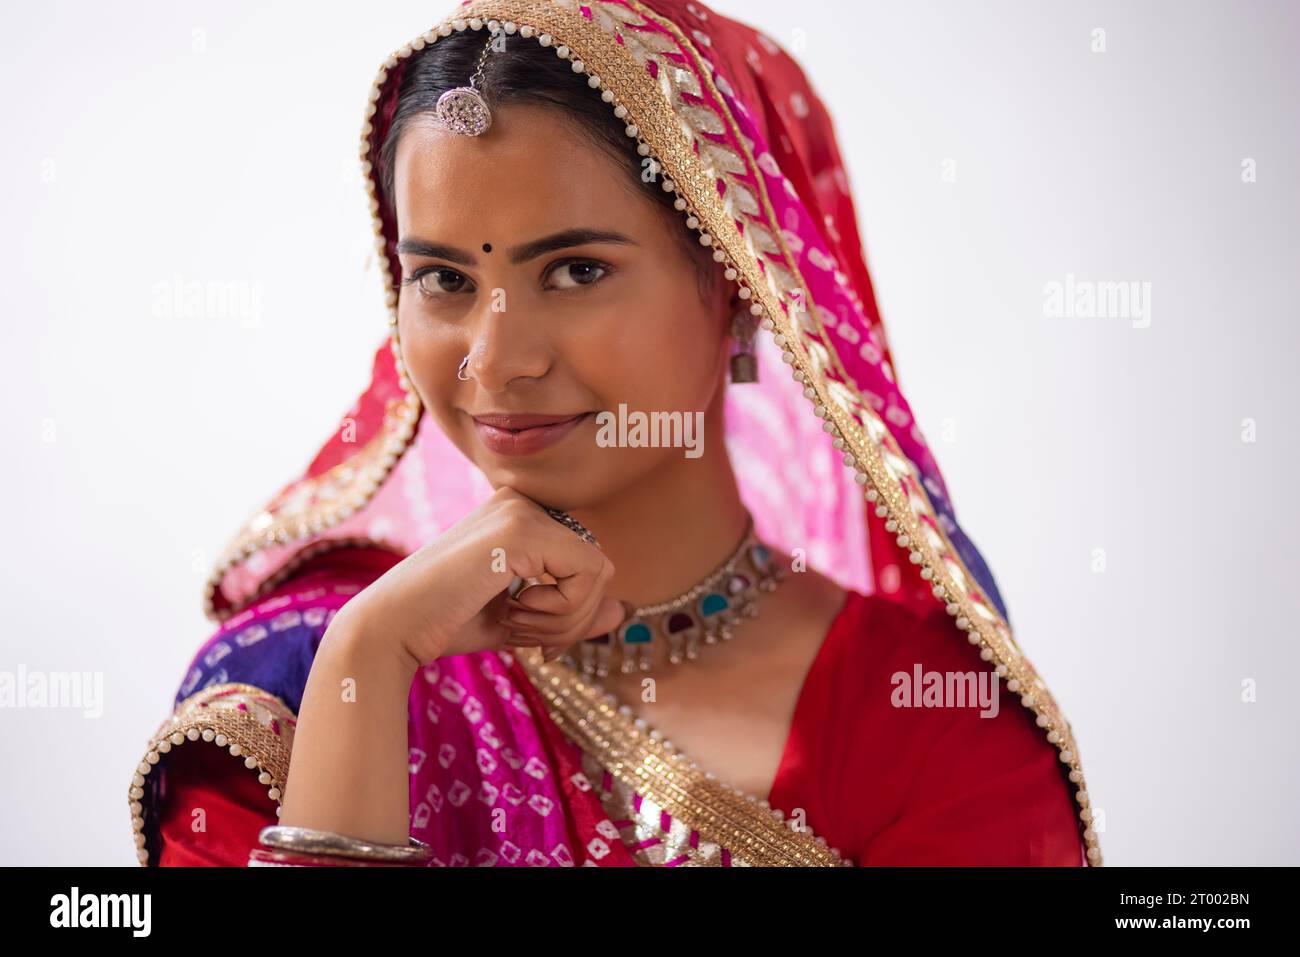 Close-up portrait of a cheerful Rajasthani young woman with hand on chin against white background Stock Photo